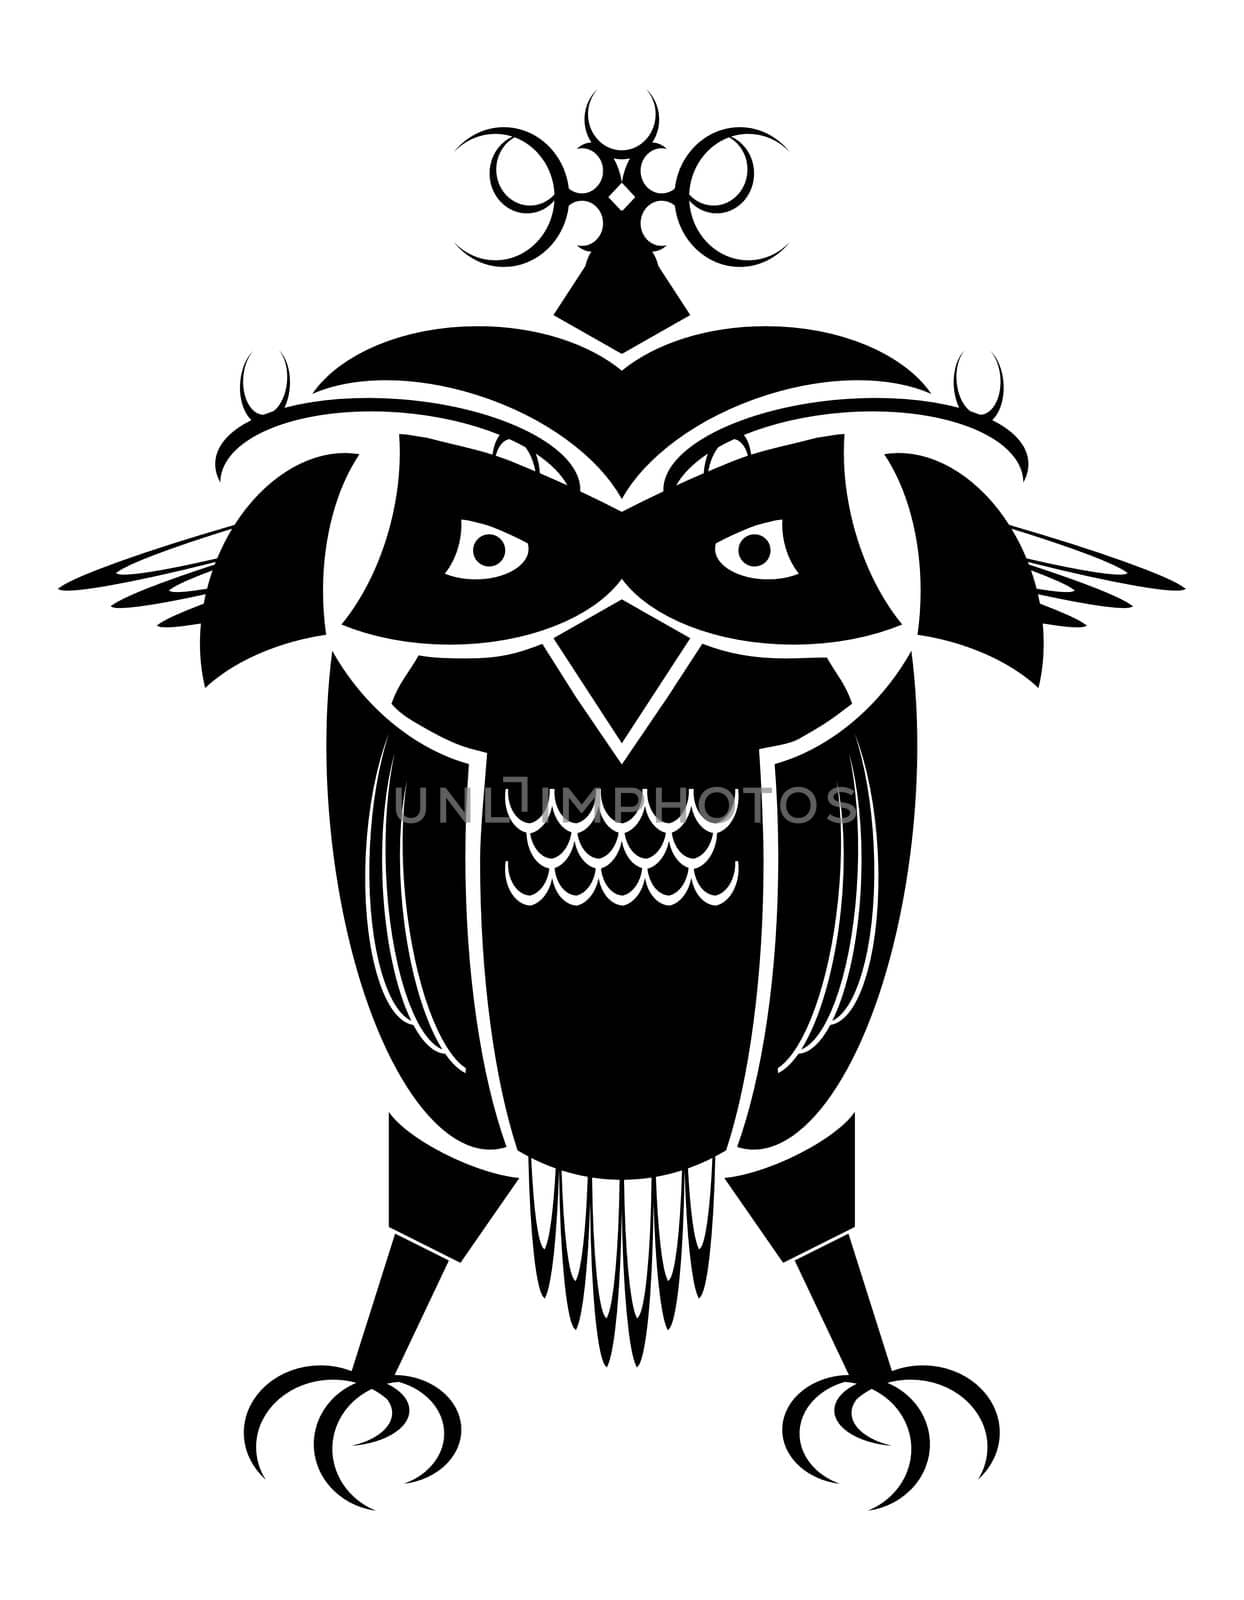 a stylided tribal design of an owl